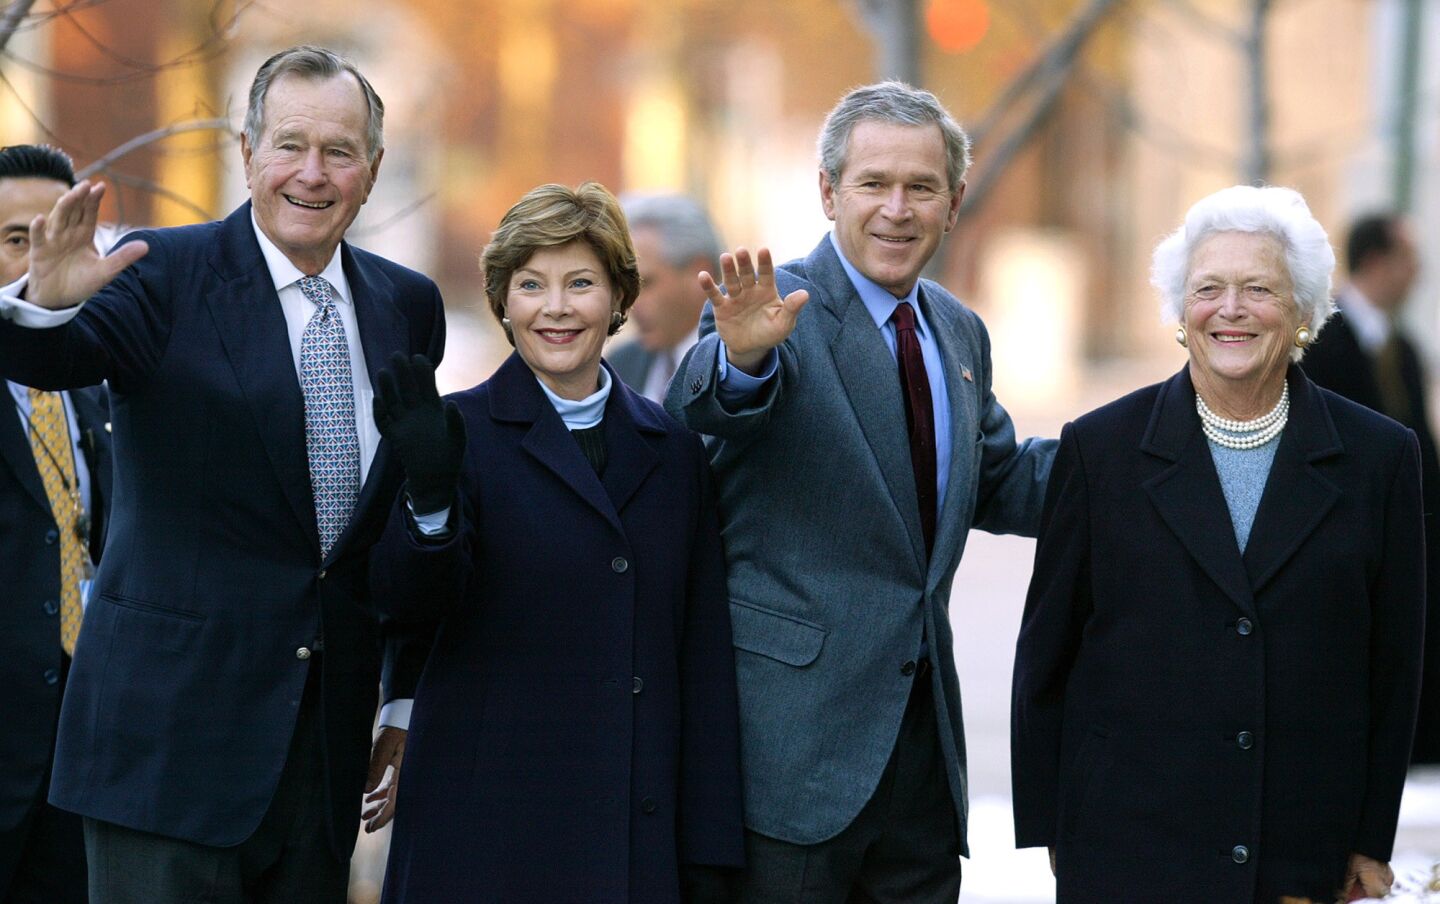 Former President George H.W. Bush, First Lady Laura Bush, President George W. Bush and former First Lady Barbara Bush wave to reporters outside St. John's church in Washington in 2003.